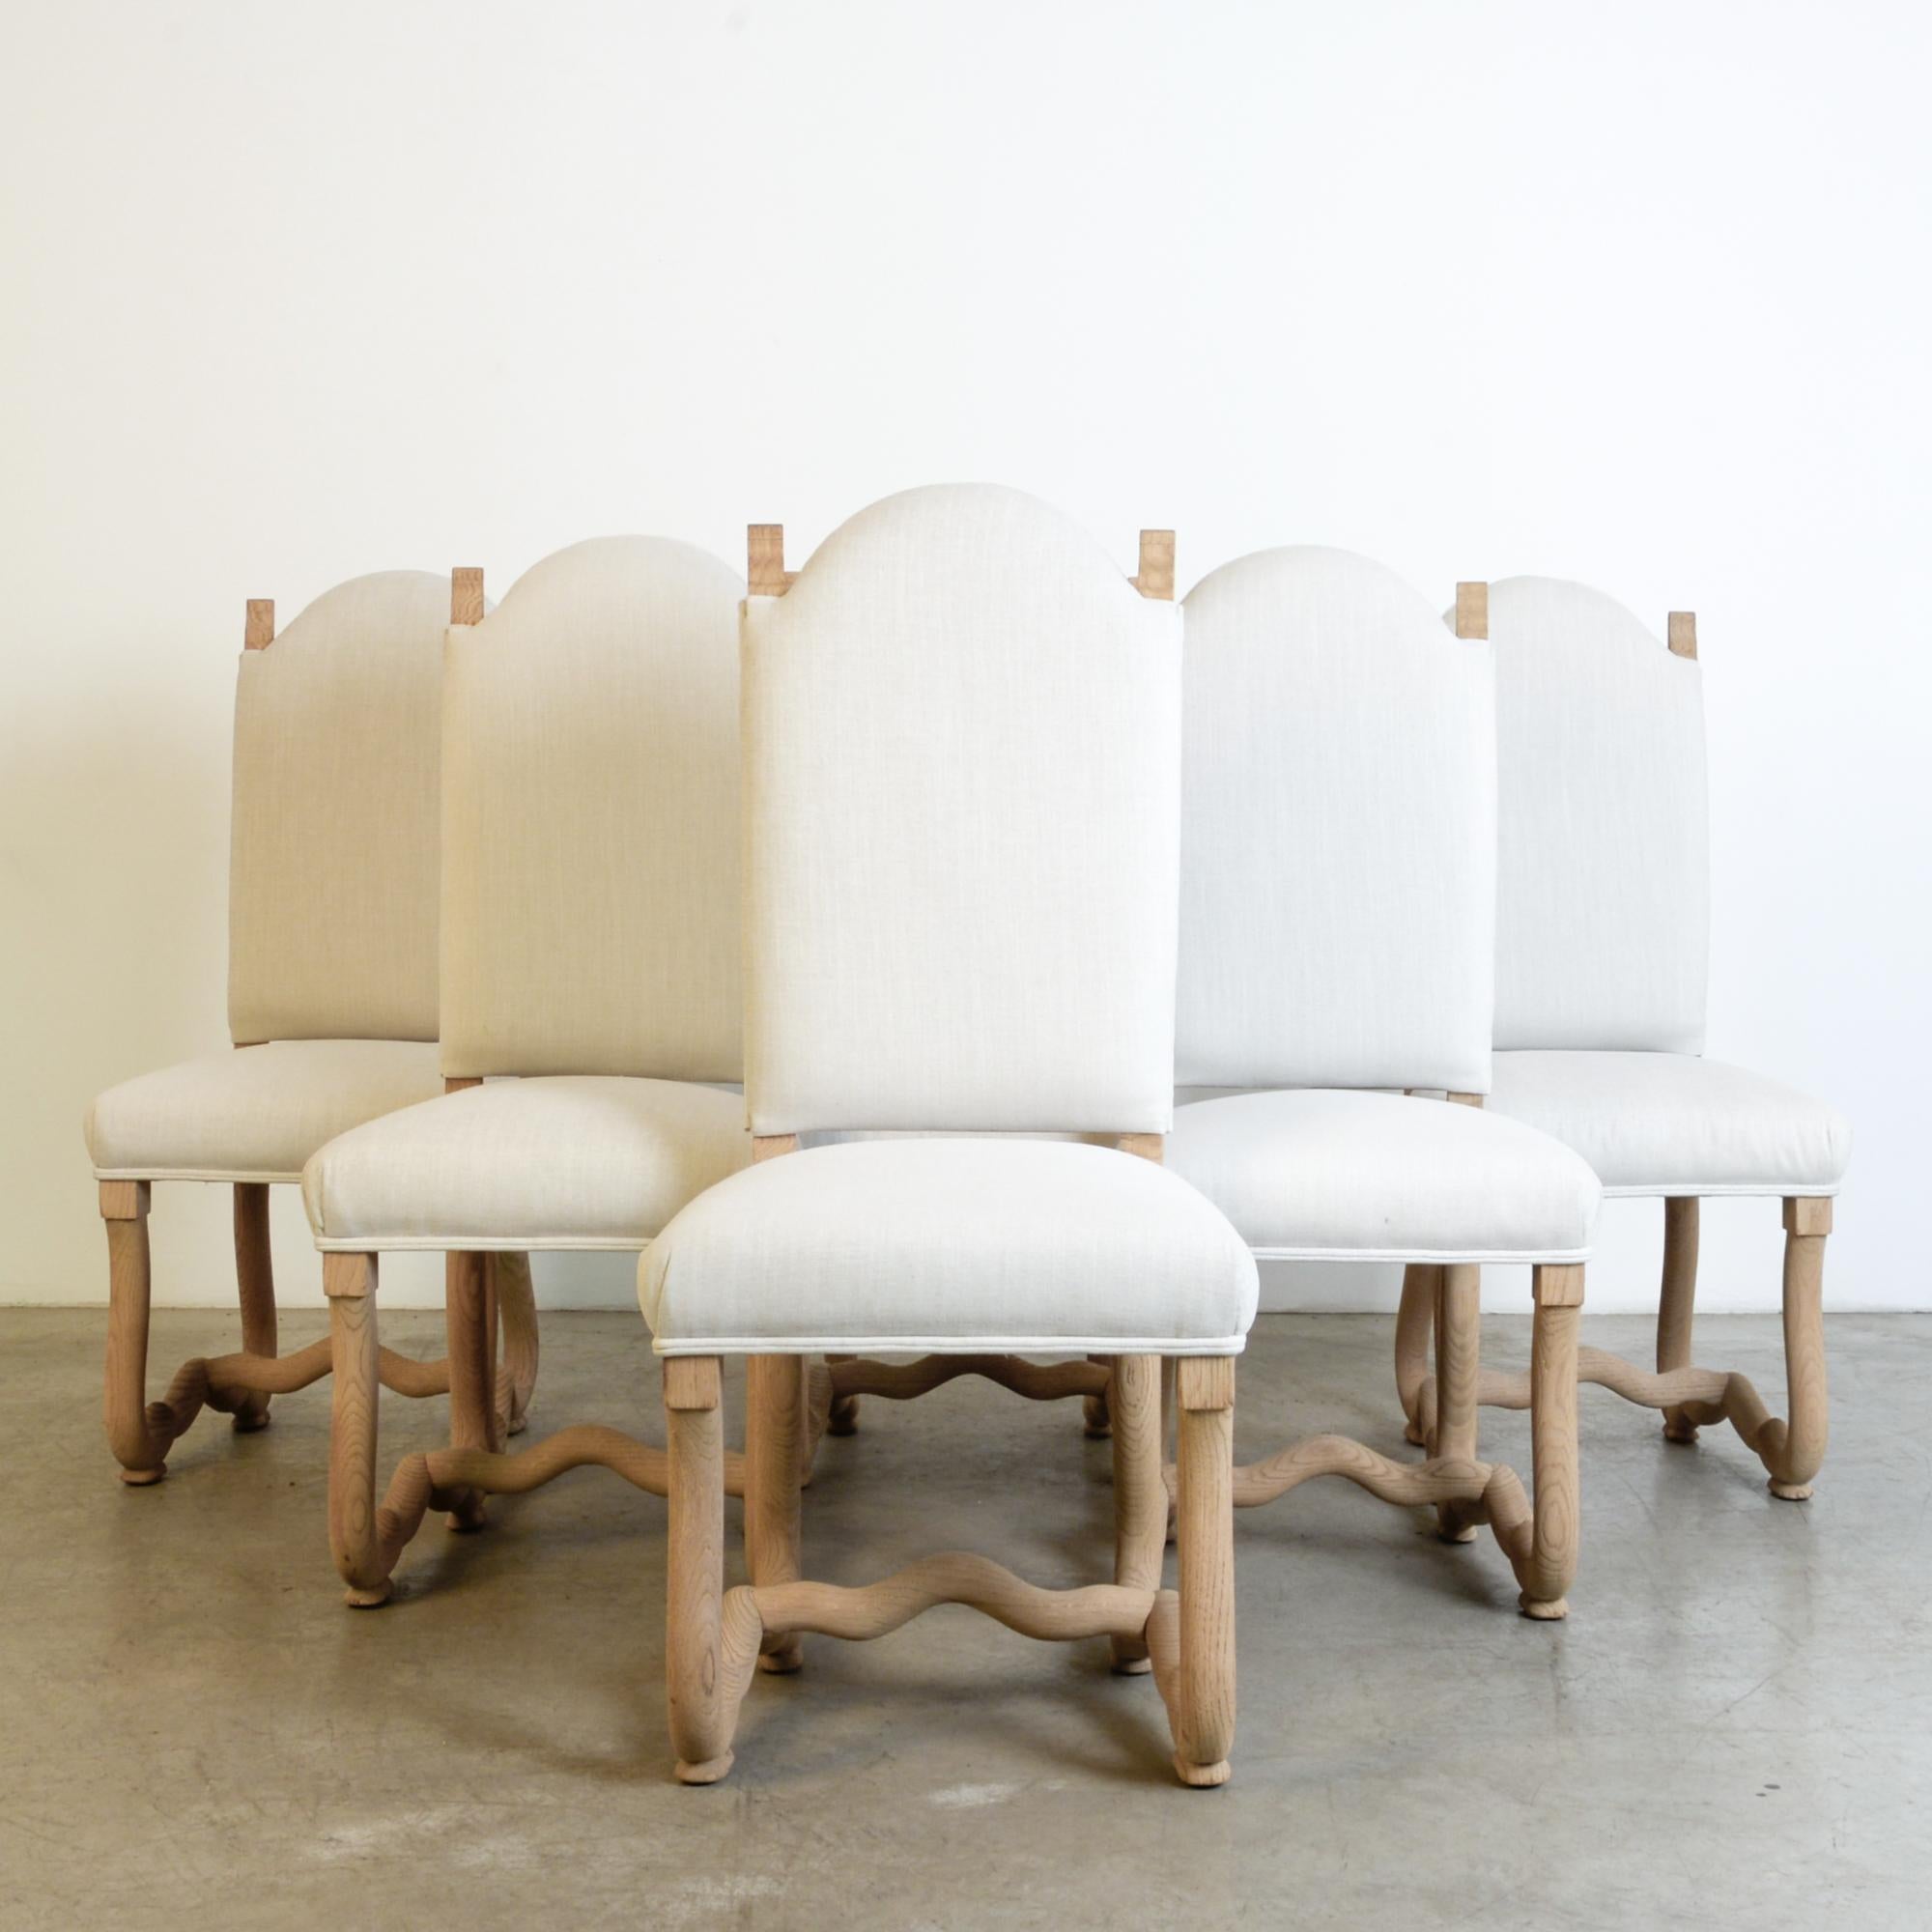 From circa 1950 Belgium, these oak dining chairs re-interpret the traditional “Os de Mouton” decorative motif. These “sheep bone” chairs have a distinctive curve, here seen in the lower frame of the chair. An elegant ornamental form, seen through a